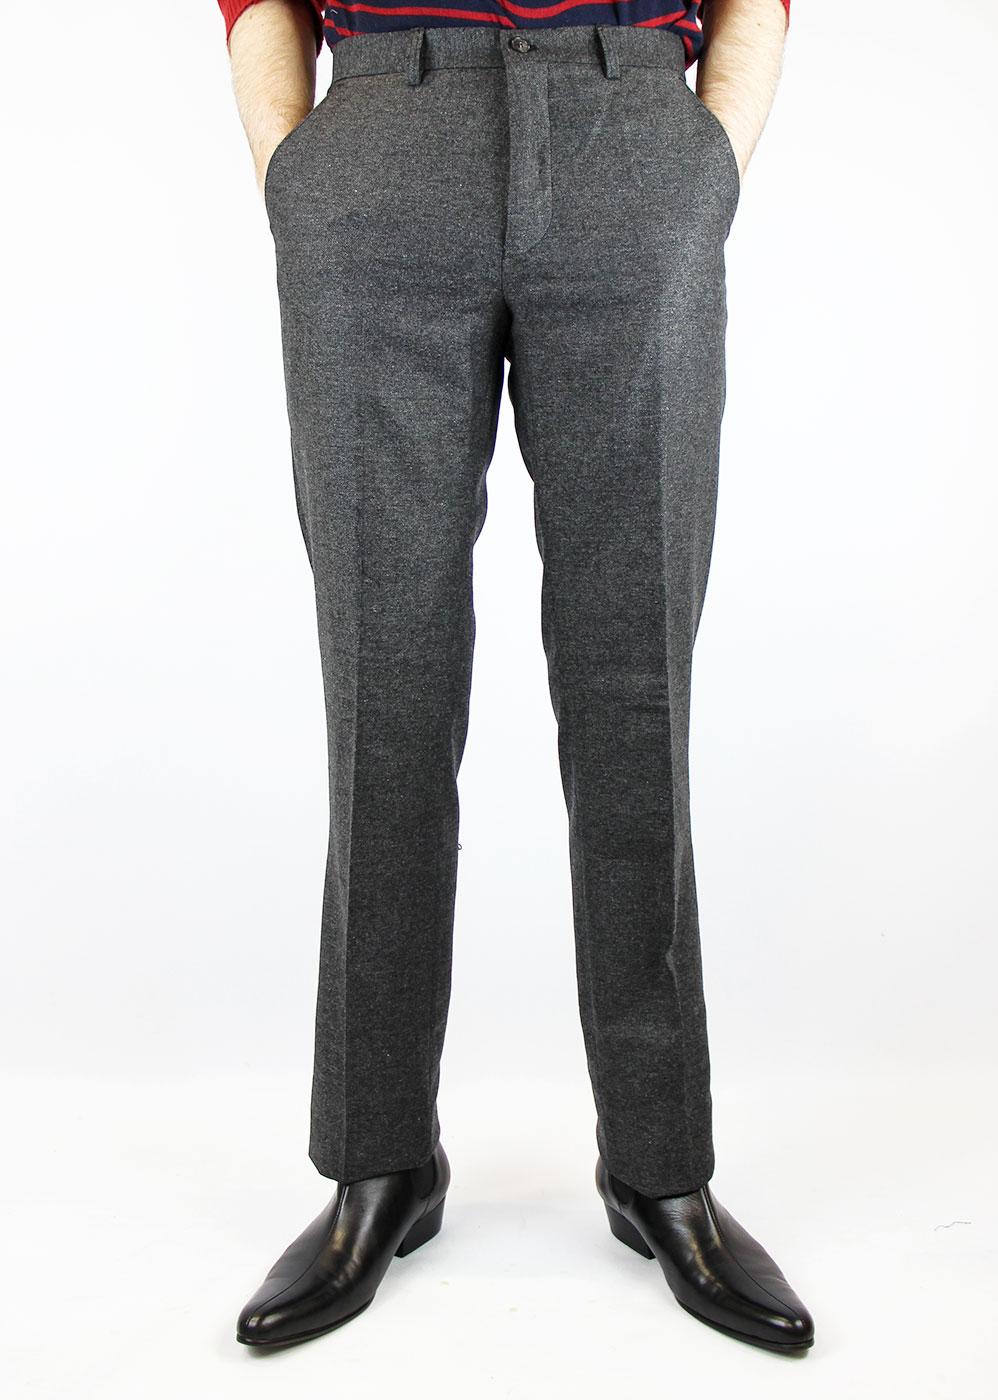 Lambswool Donegal Trousers | Mens wool trousers, Ben silver, Men fashion  casual outfits